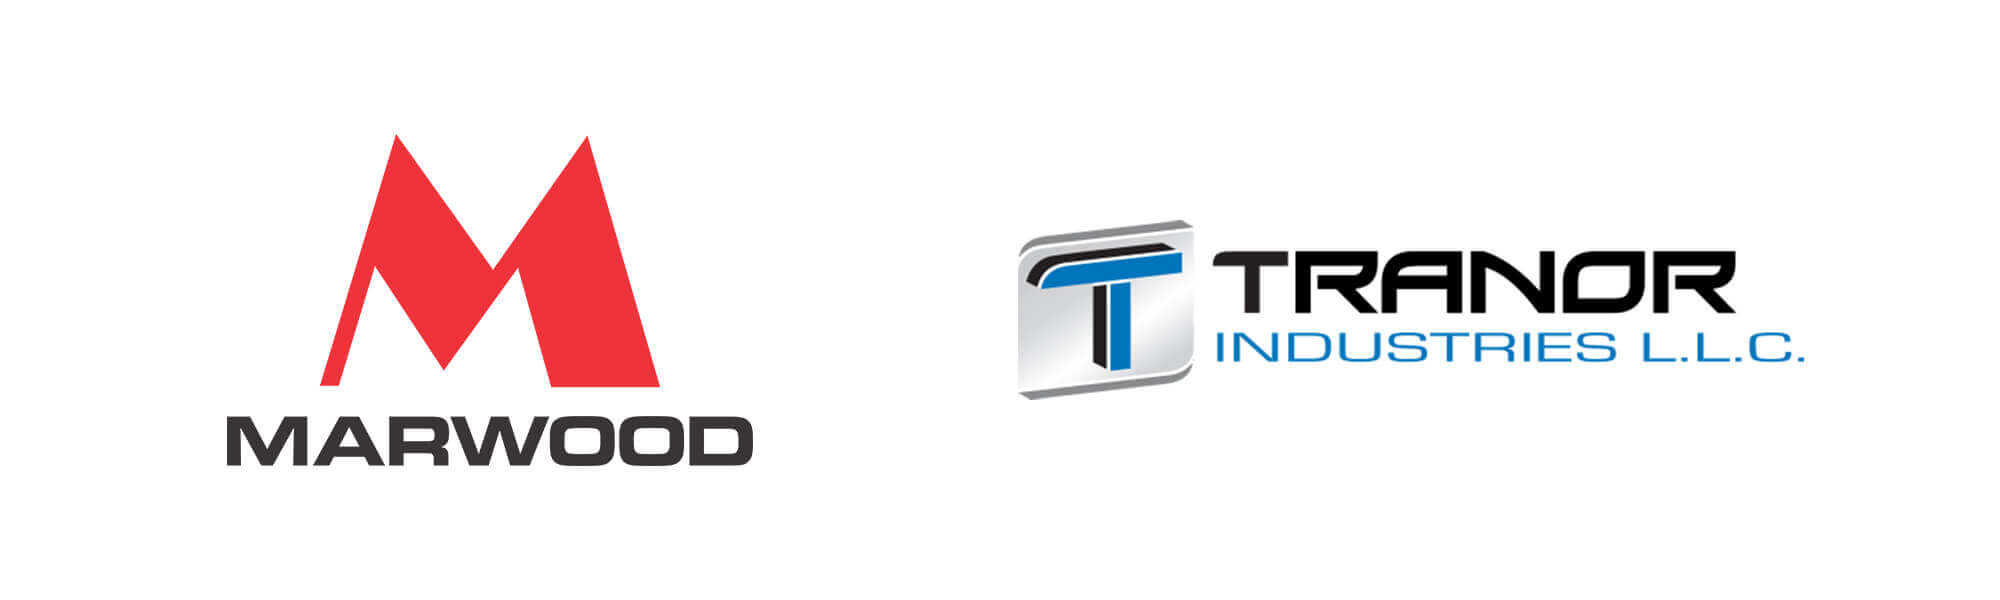 A image showing the logos of Marwood and Tranor Industries L.L.C